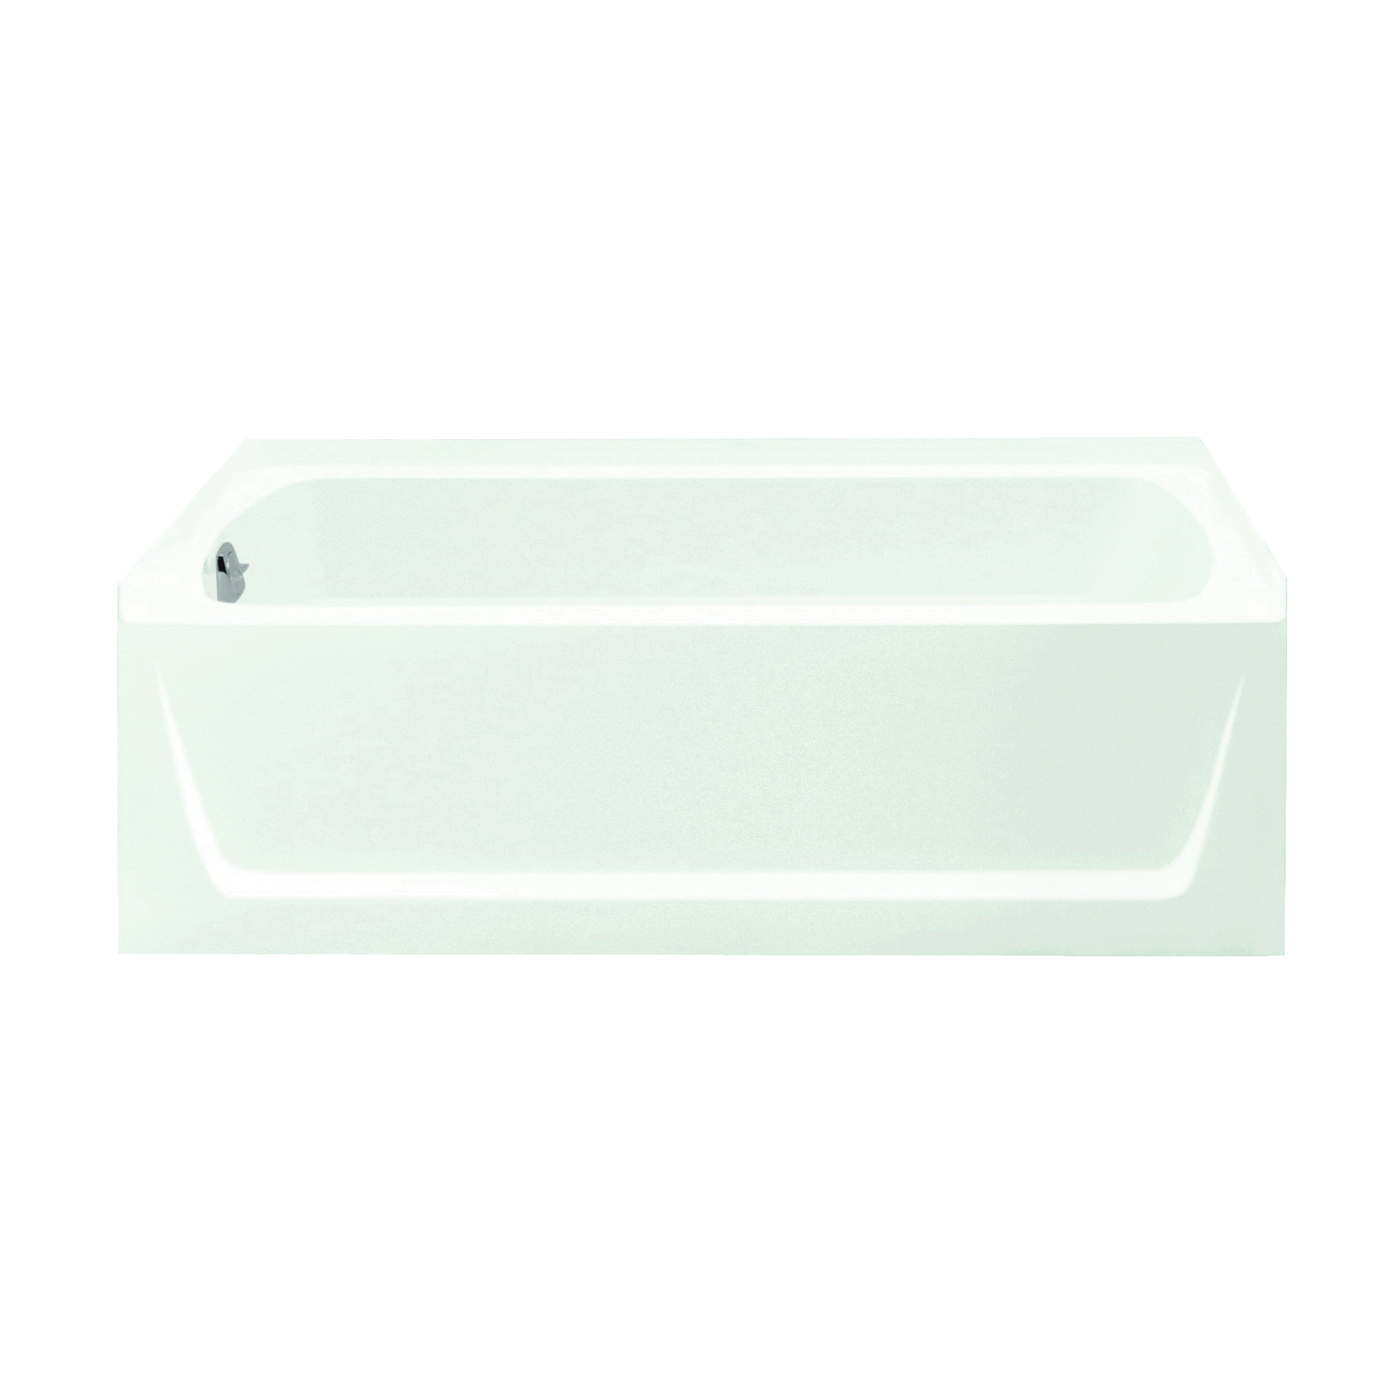 Ensemble 71121110-0 Bathtub, 55 gal Capacity, 60 in L, 32 in W, 20 in H, Alcove Installation, Solid Vikrell